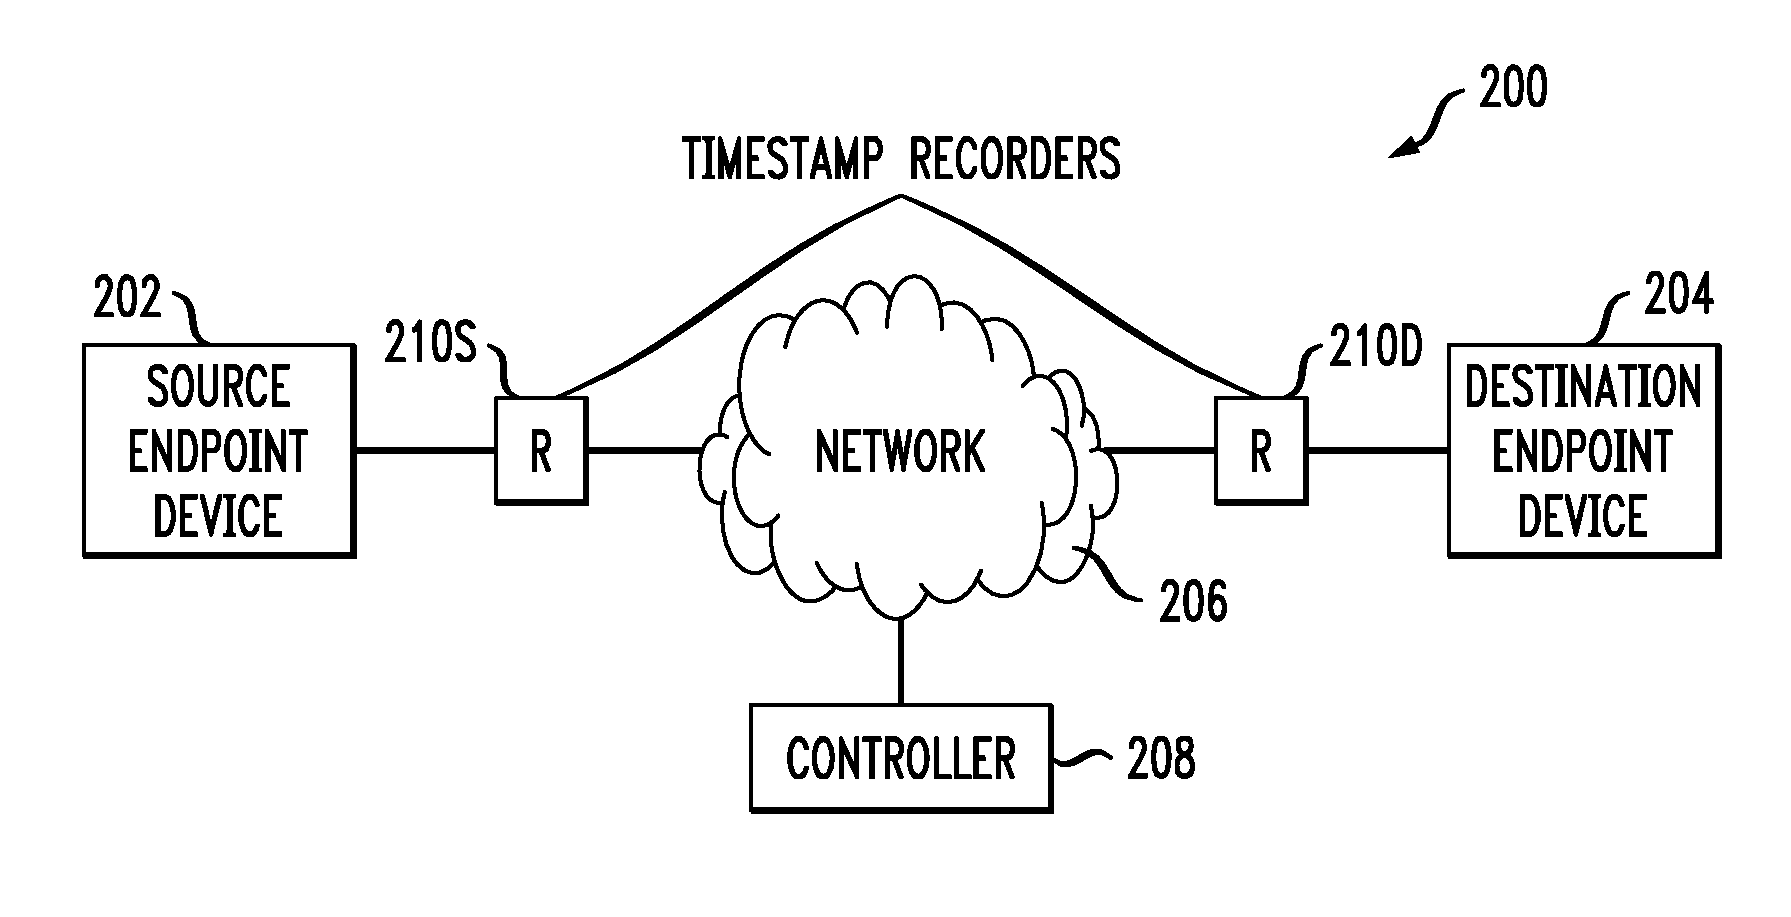 Network condition capture and reproduction